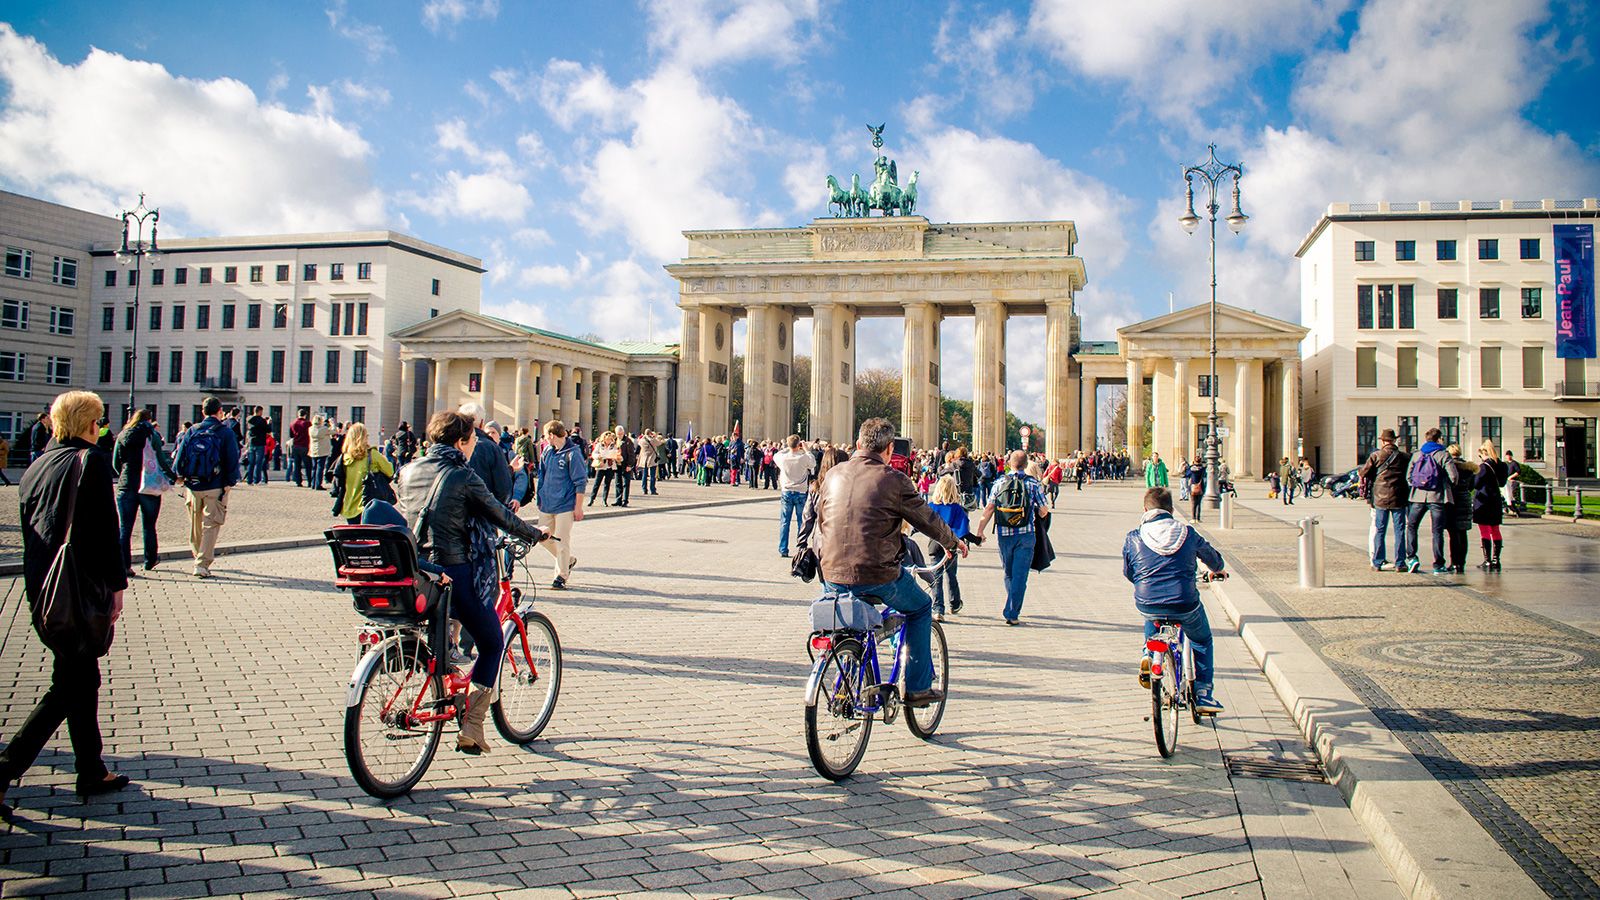 <strong>8. Berlin, Germany: </strong>It's possible to enjoy Berlin on a budget, suggests Time Out, especially now that there's a $9.50 a month <a href="index.php?page=&url=https%3A%2F%2Fcnn.com%2Ftravel%2Farticle%2Fgermany-9-euro-travel-ticket%2Findex.html" target="_blank">German summer travel pass on the horizon.</a>